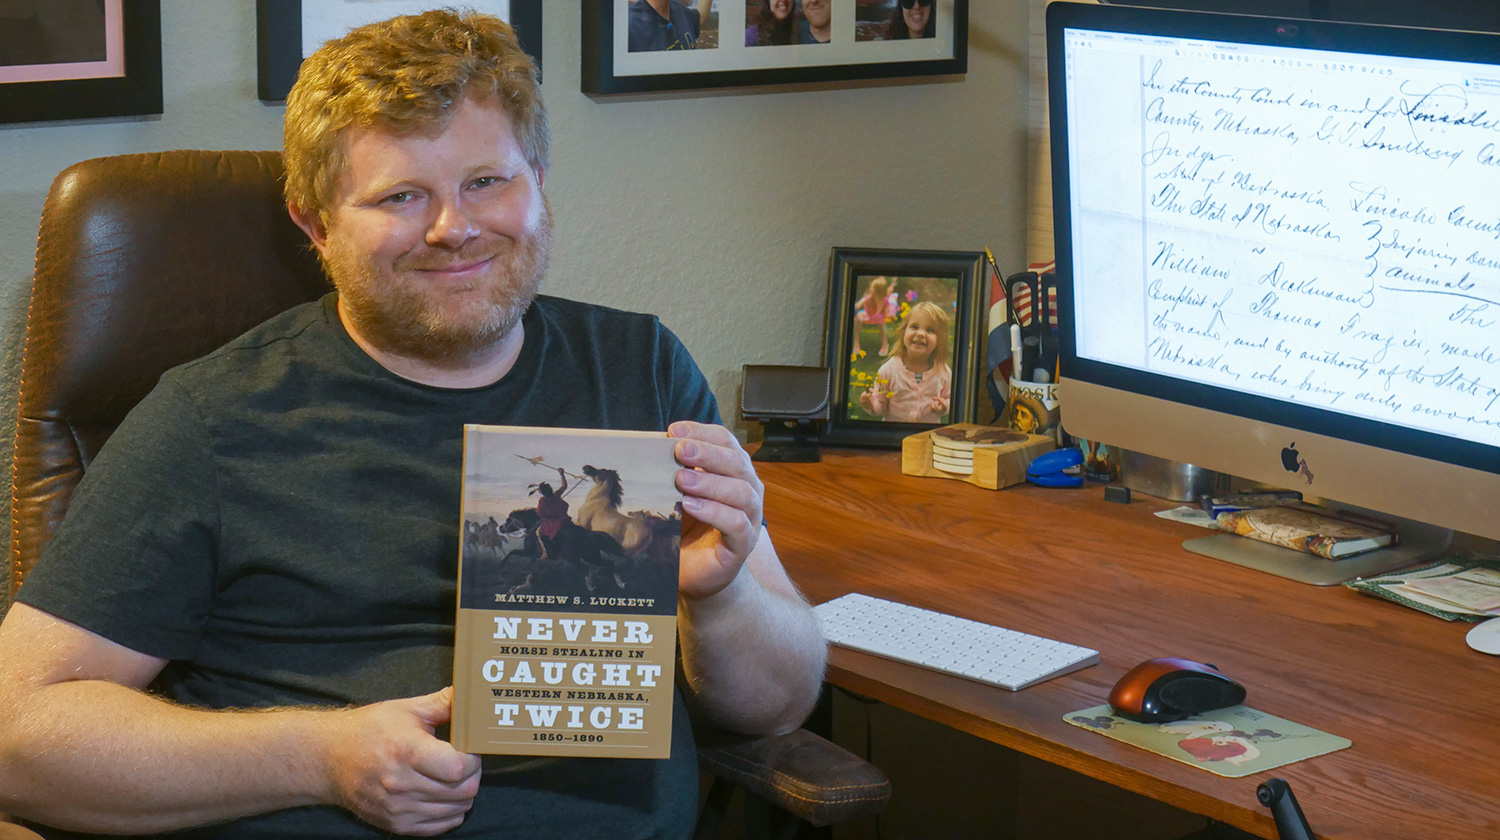 Mathew Luckett with his new book “Never Caught Twice: Horse Stealing in Western Nebraska, 1850–1890.”